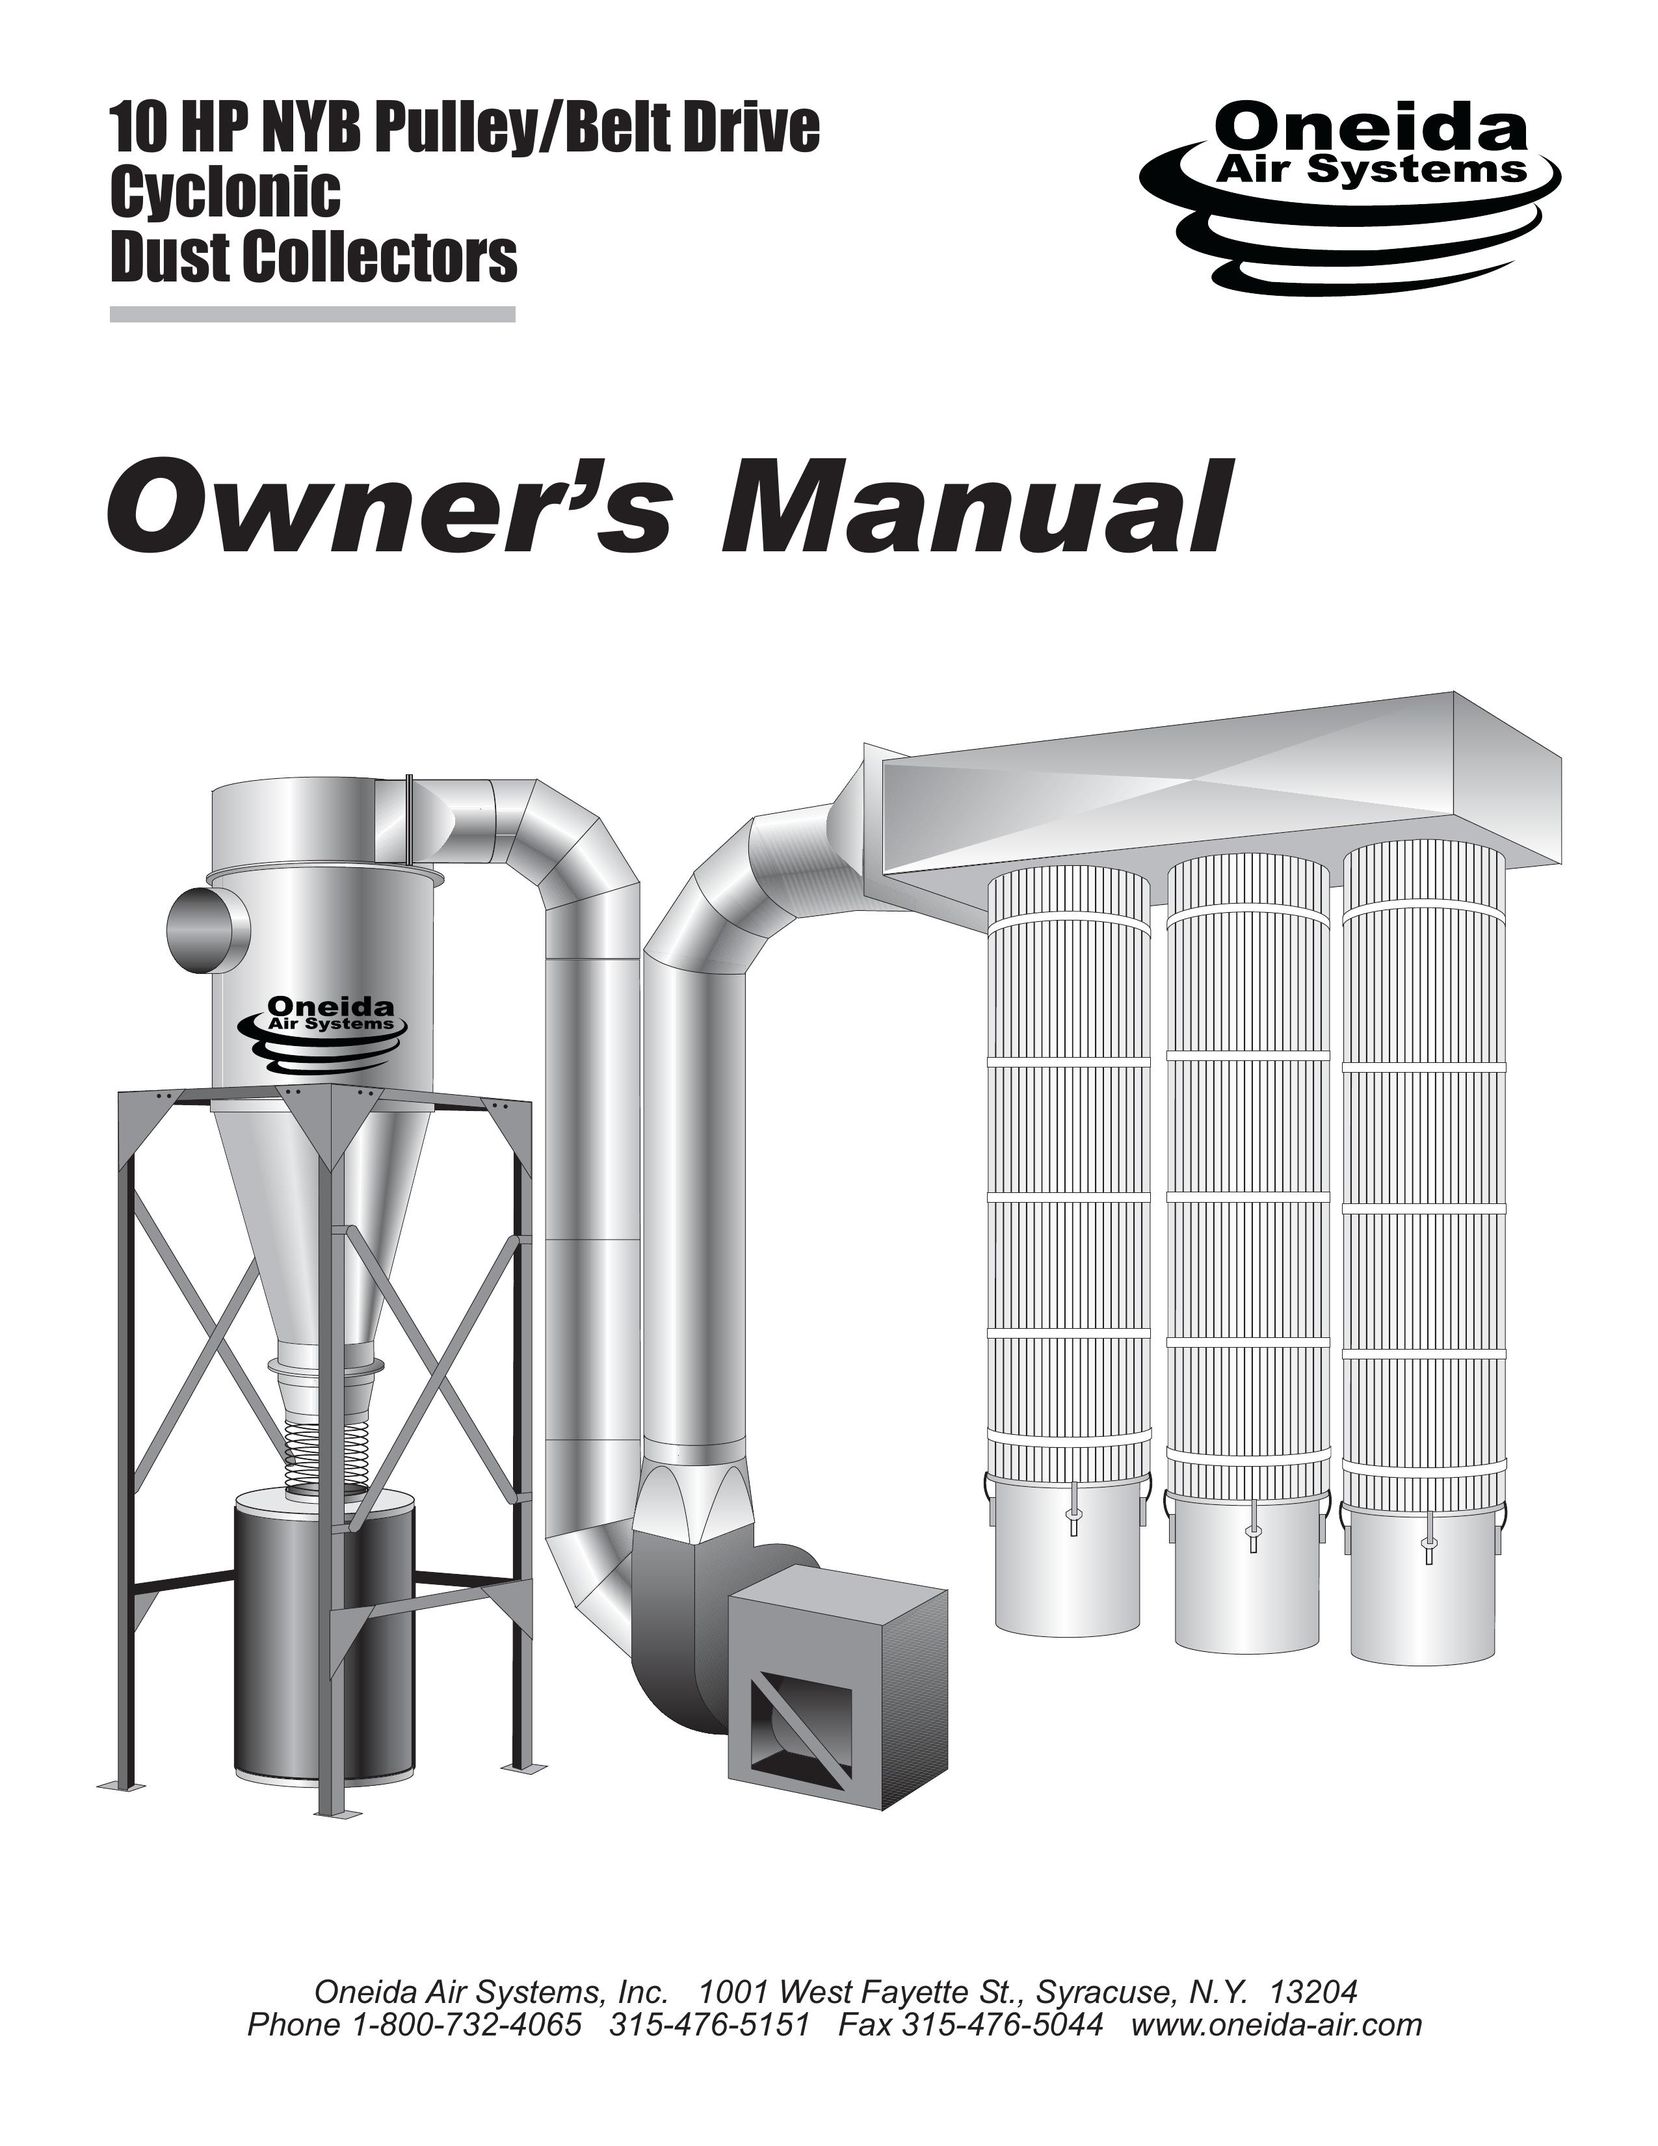 Oneida Air Systems 10 HP Dust Collector User Manual